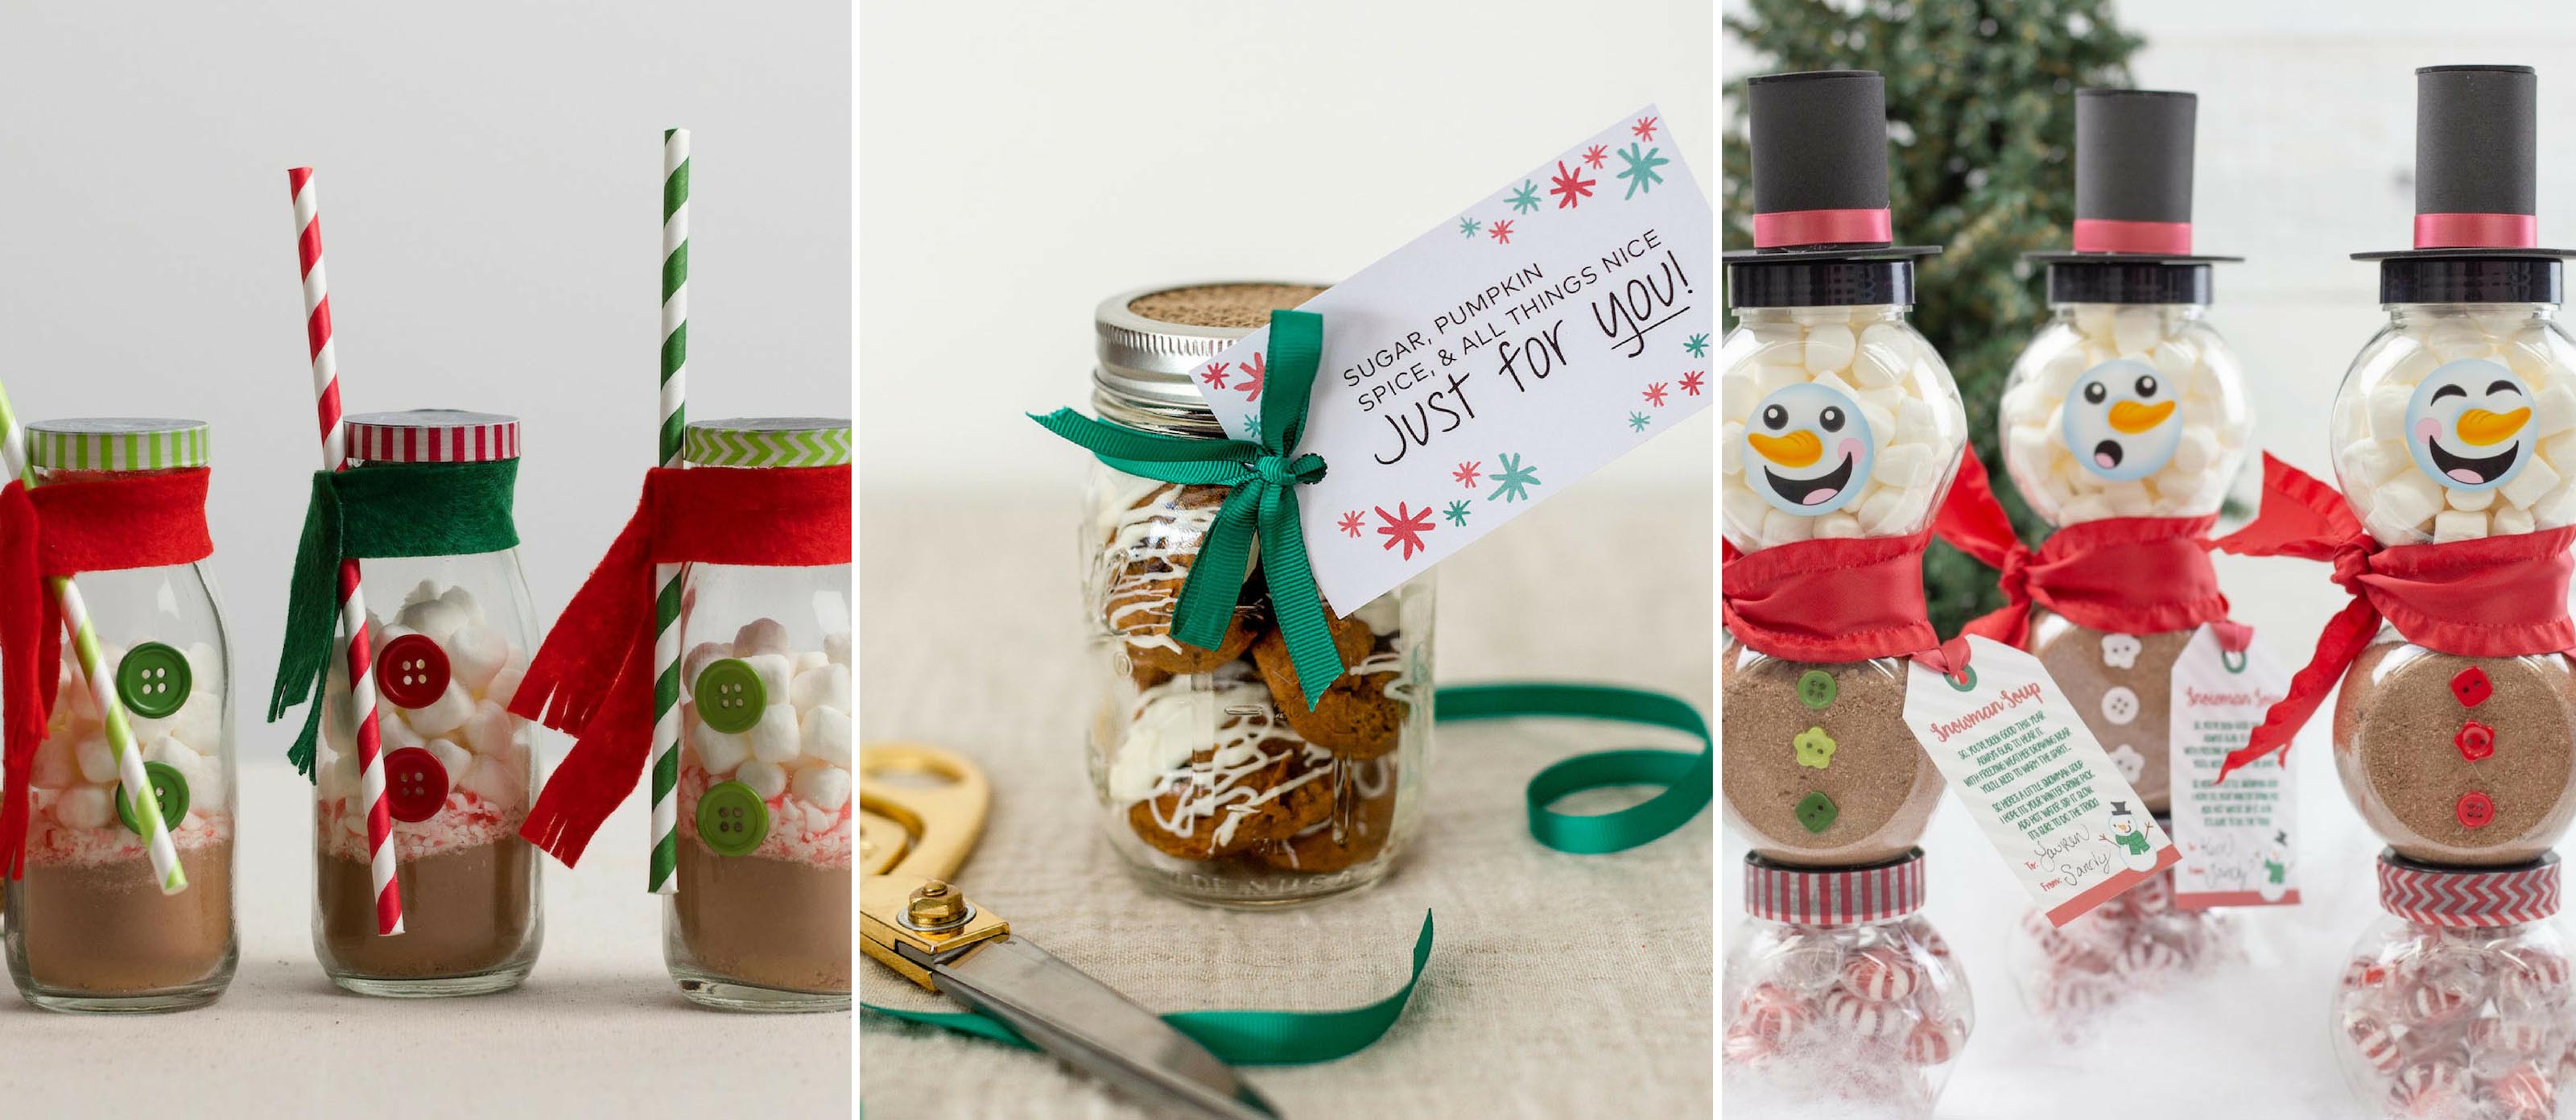 DIY Snowman Kit in a Jar with Free Printable Tag - Great Neighbor Gift,  Teacher Gift, Stocking Stuffer 